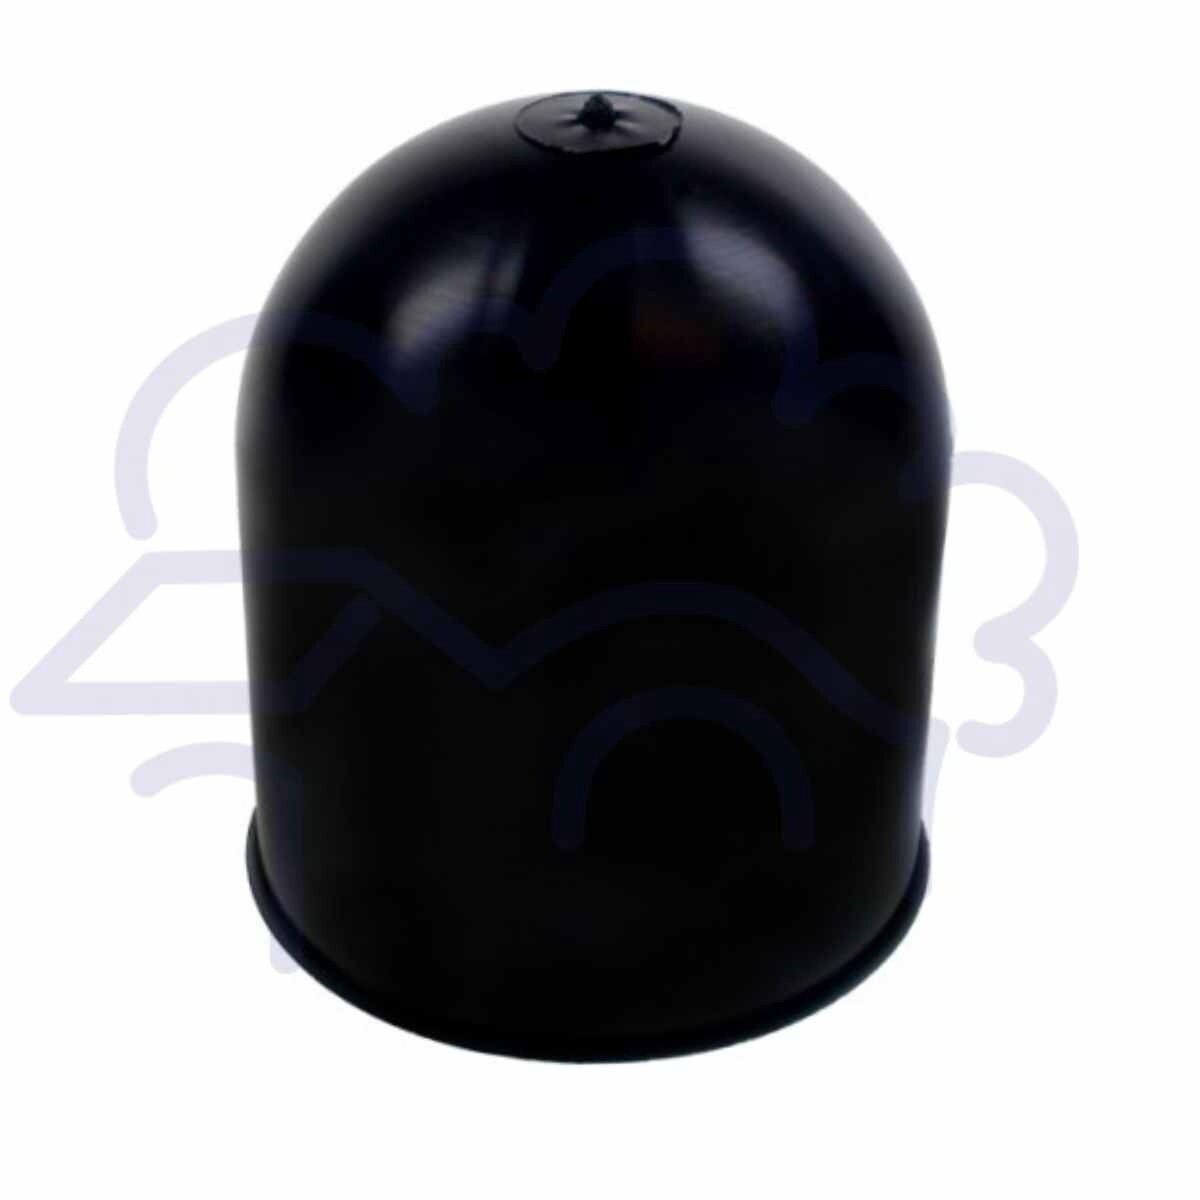 Towball cover, black plastic